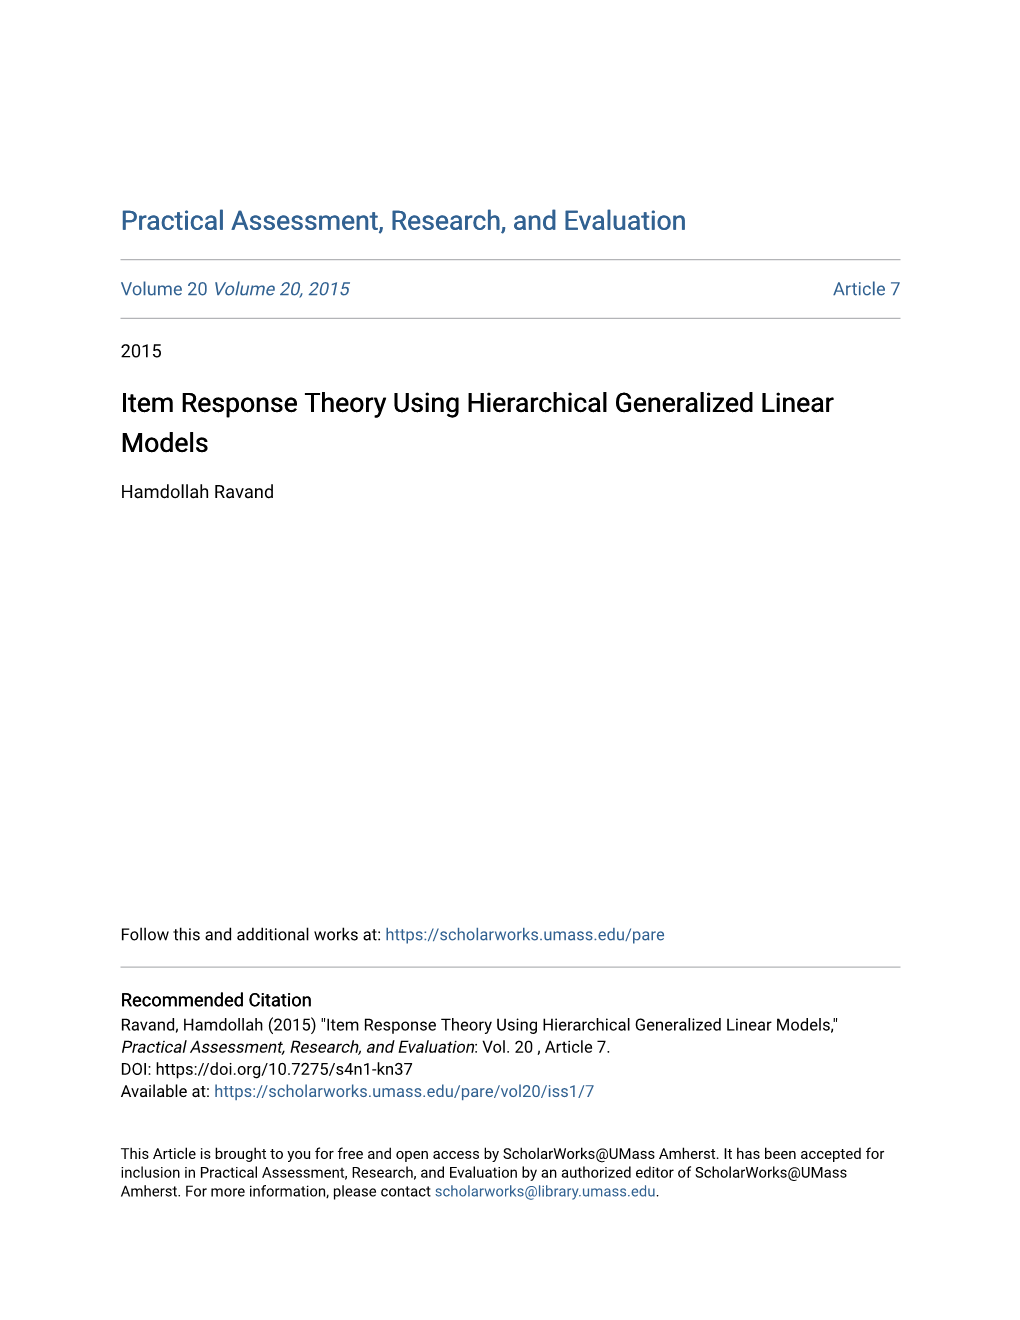 Item Response Theory Using Hierarchical Generalized Linear Models